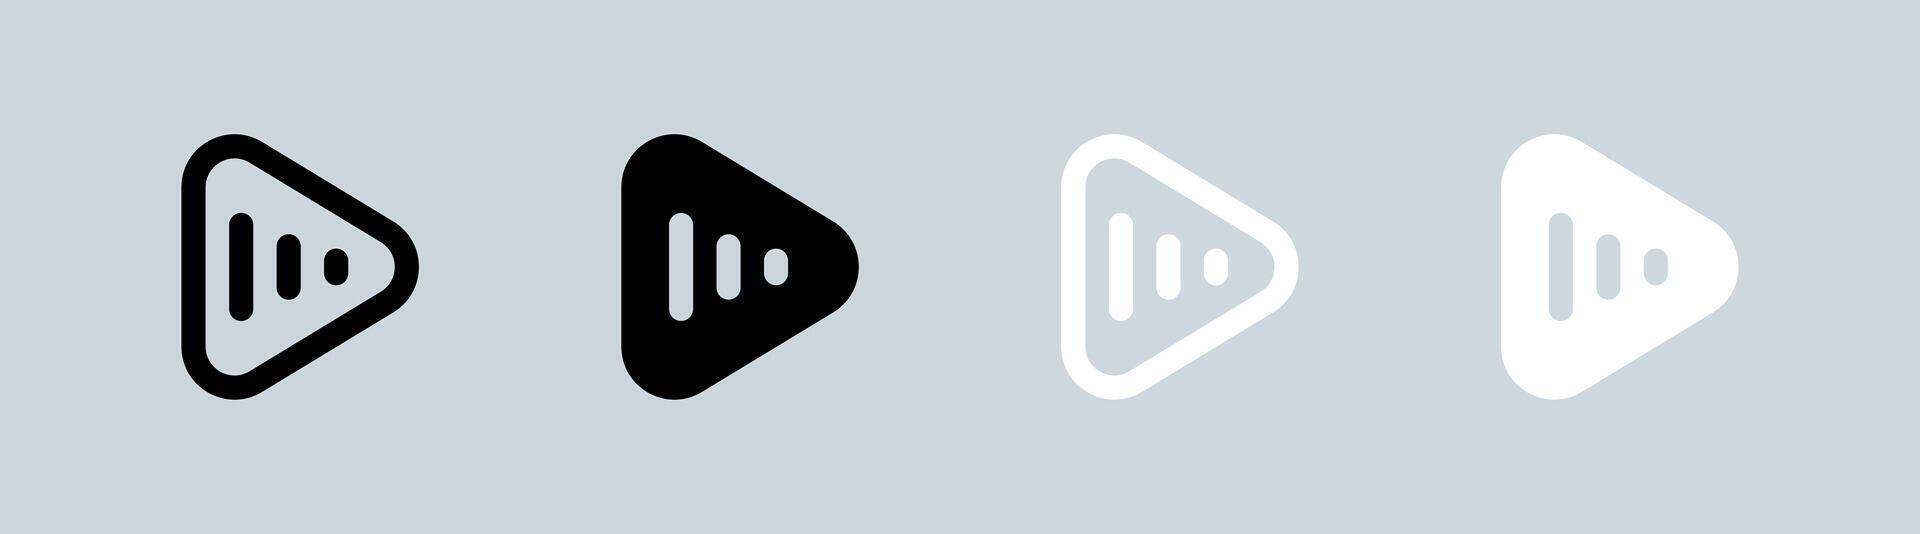 Media player icon set in black and white. Video signs vector illustration.